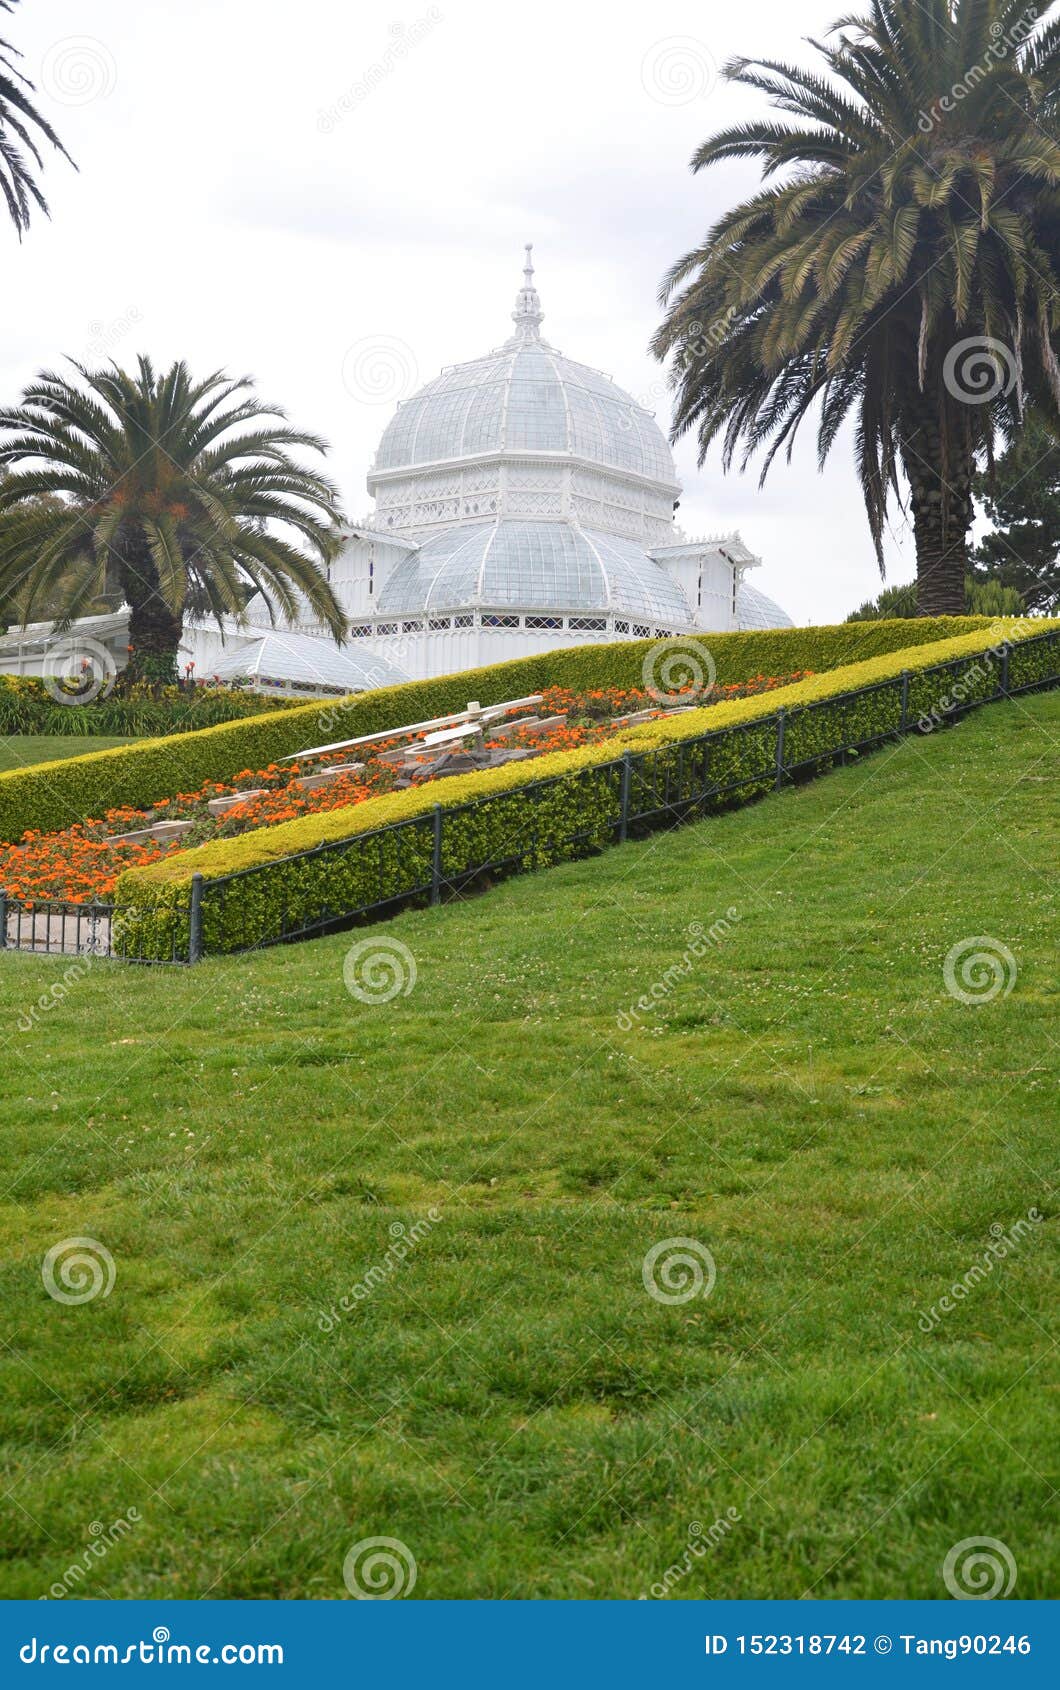 Conservatory Of Flowers In Golden Gate Park Editorial Photography